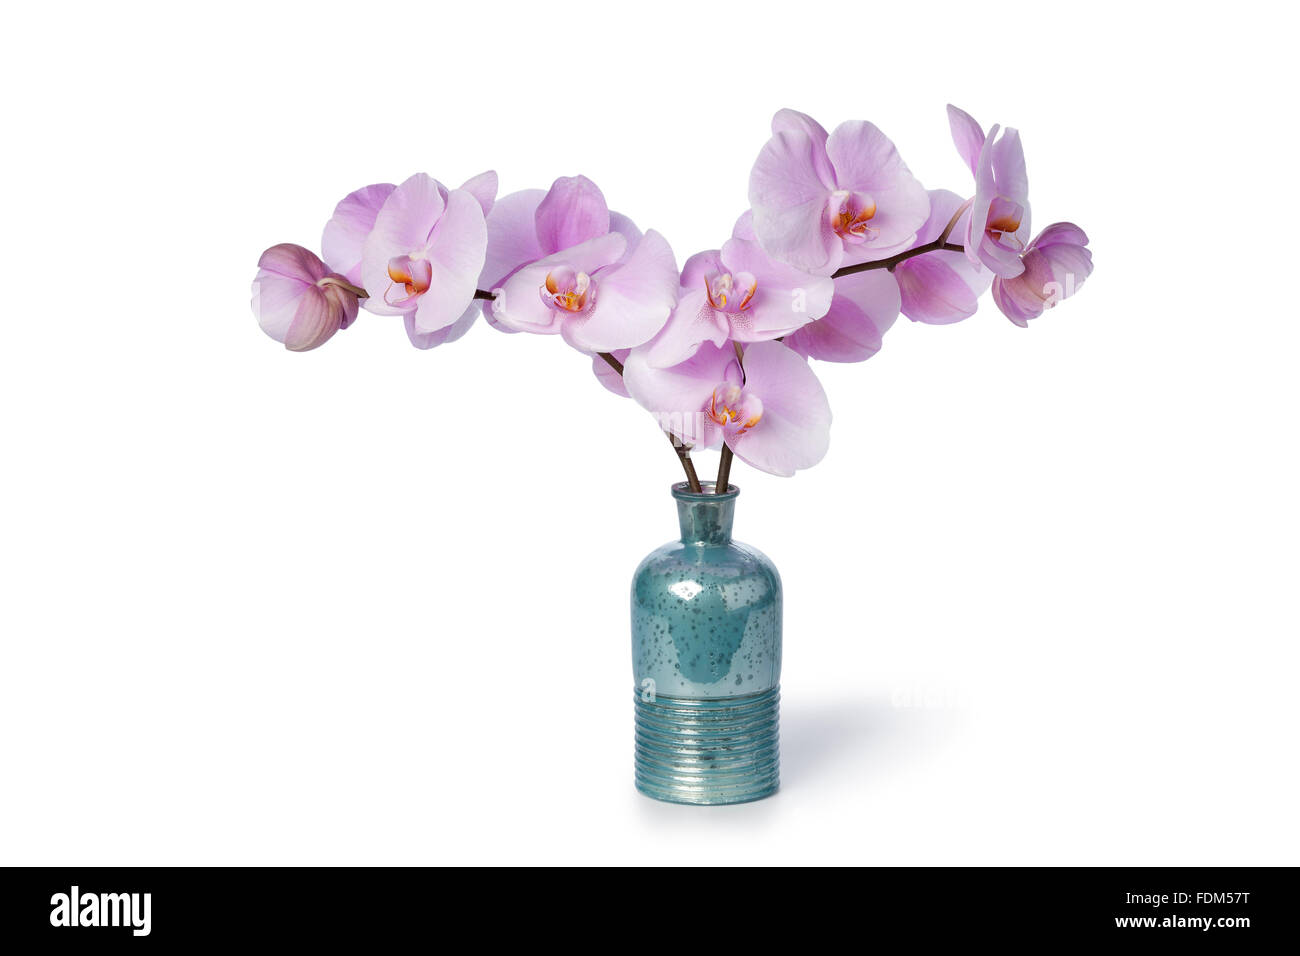 Pink Orchid flowers in a bottle on white background Stock Photo